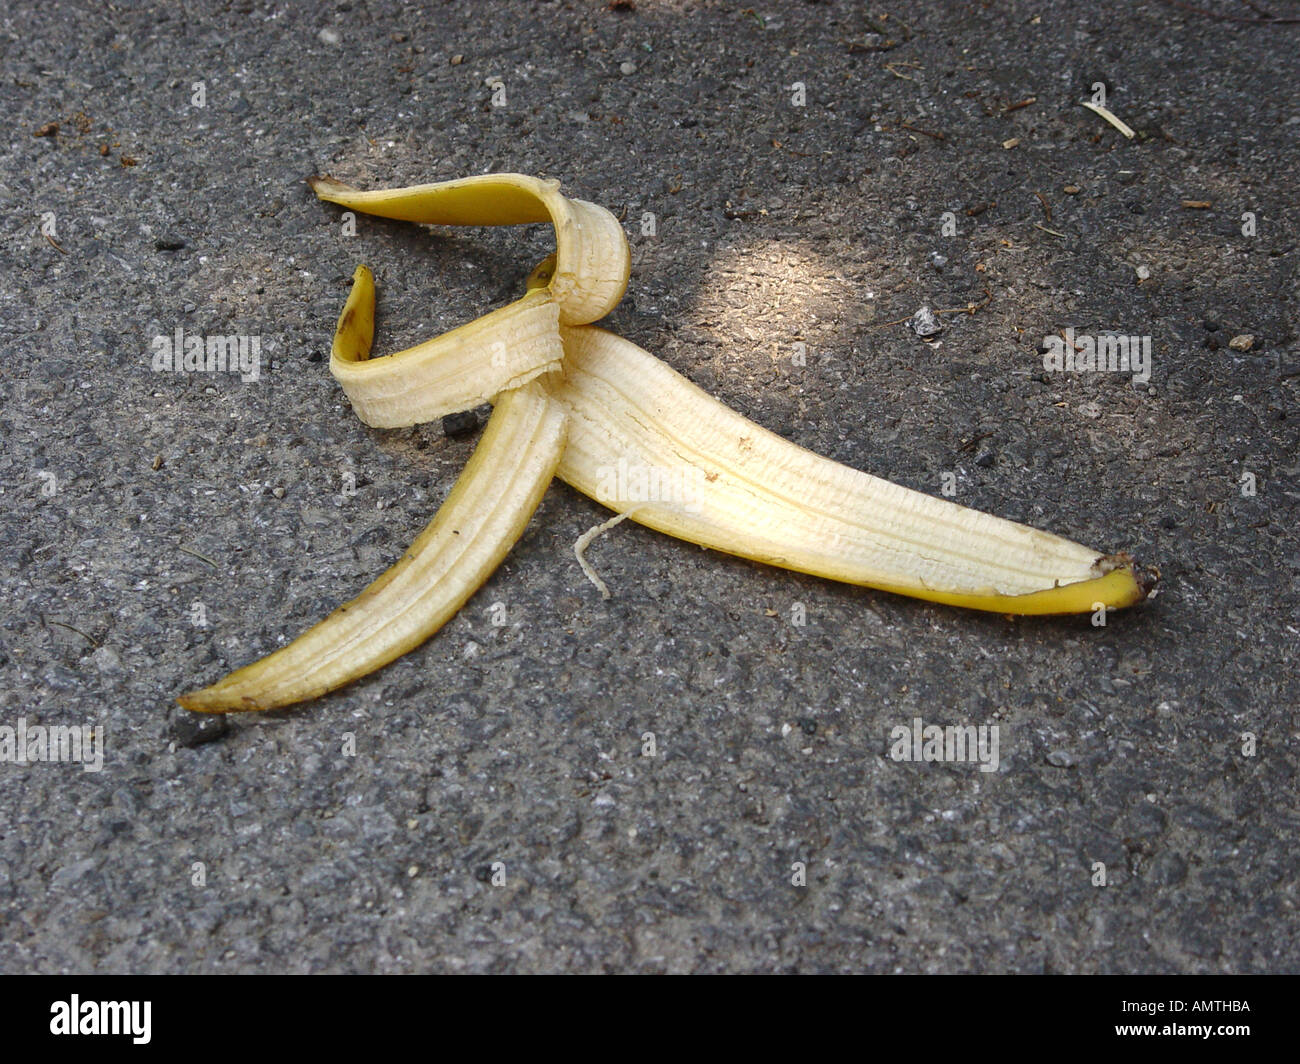 Banana skin on the road as symbol for slipping falling down etc  Stock Photo